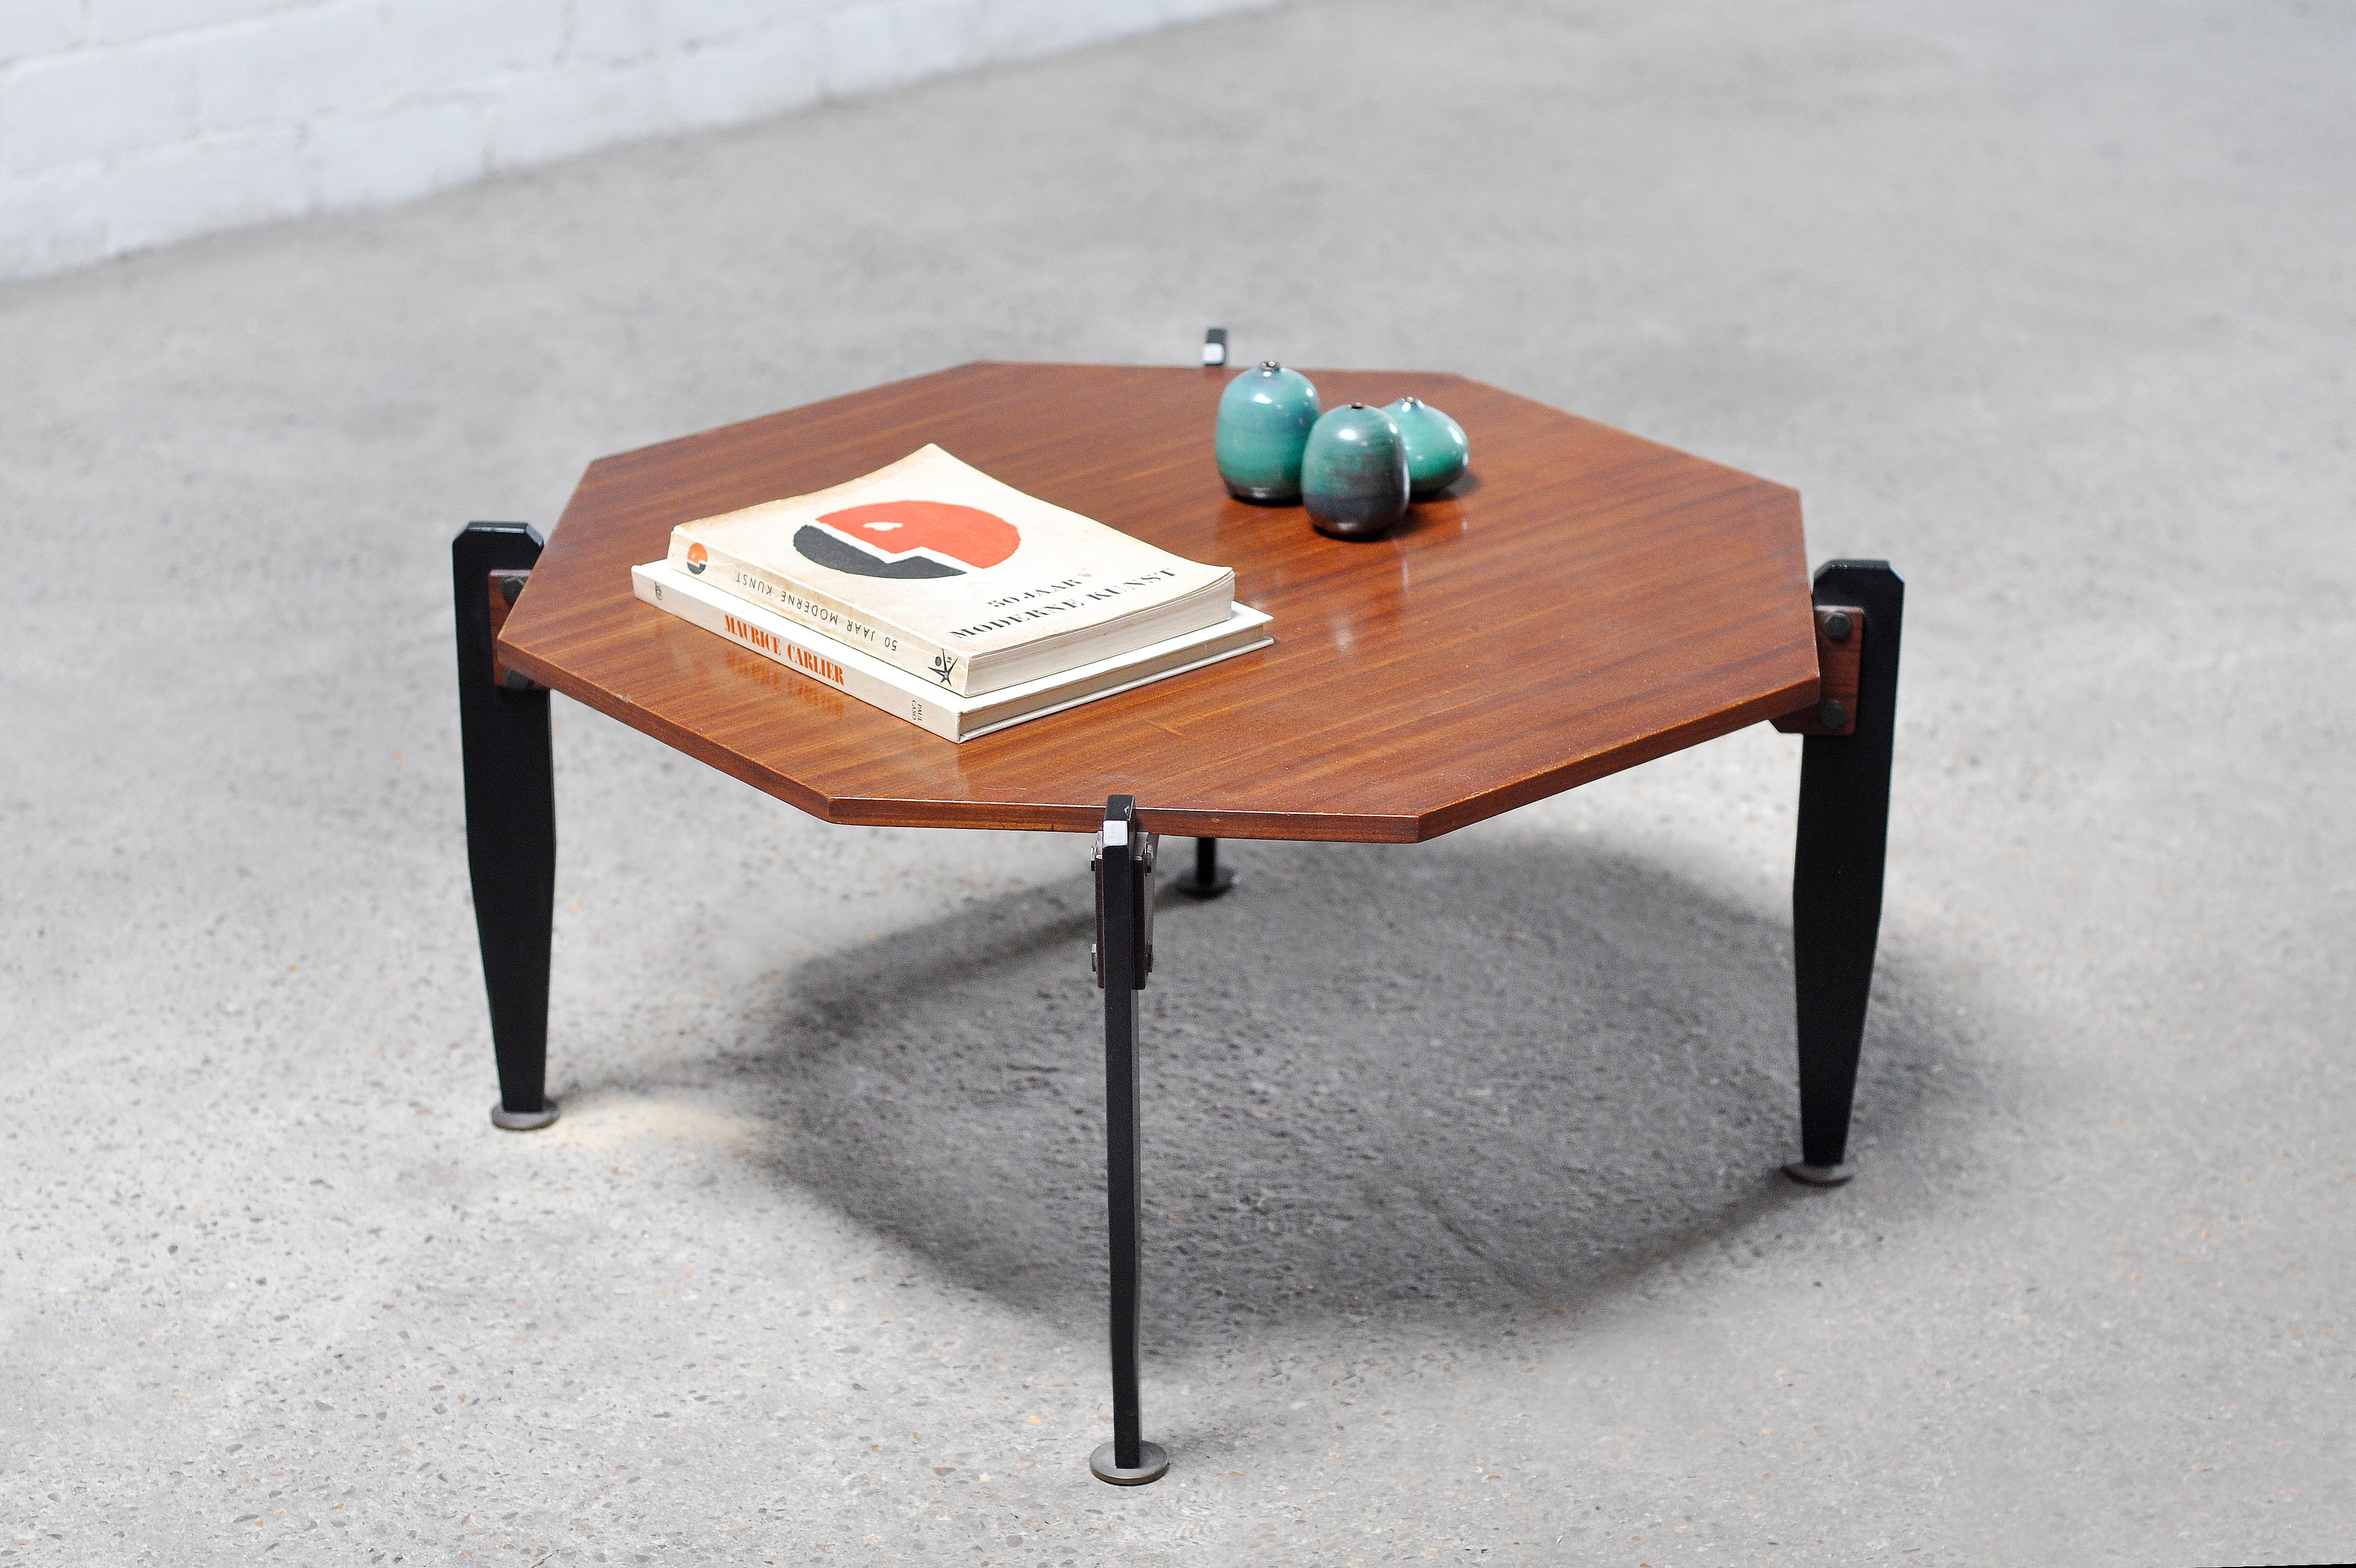 Mid-20th Century Italian Modernist Coffee Table in Teak And Lacquered Metal, 1950s For Sale